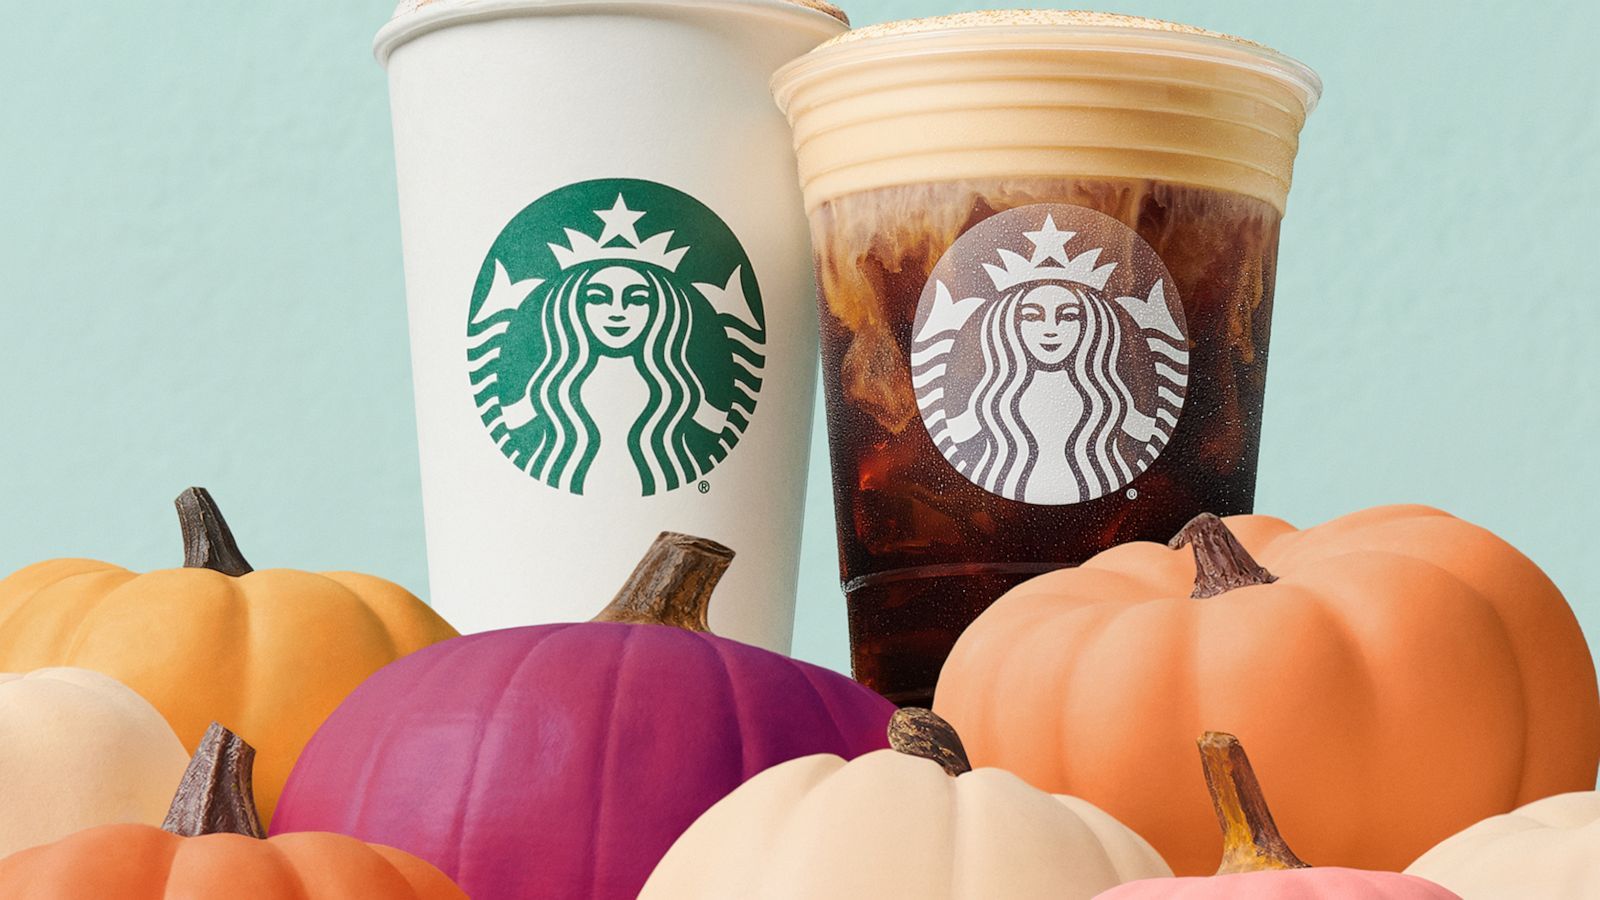 It's officially fall at Starbucks as pumpkin spice lattes make their earliest debut yet